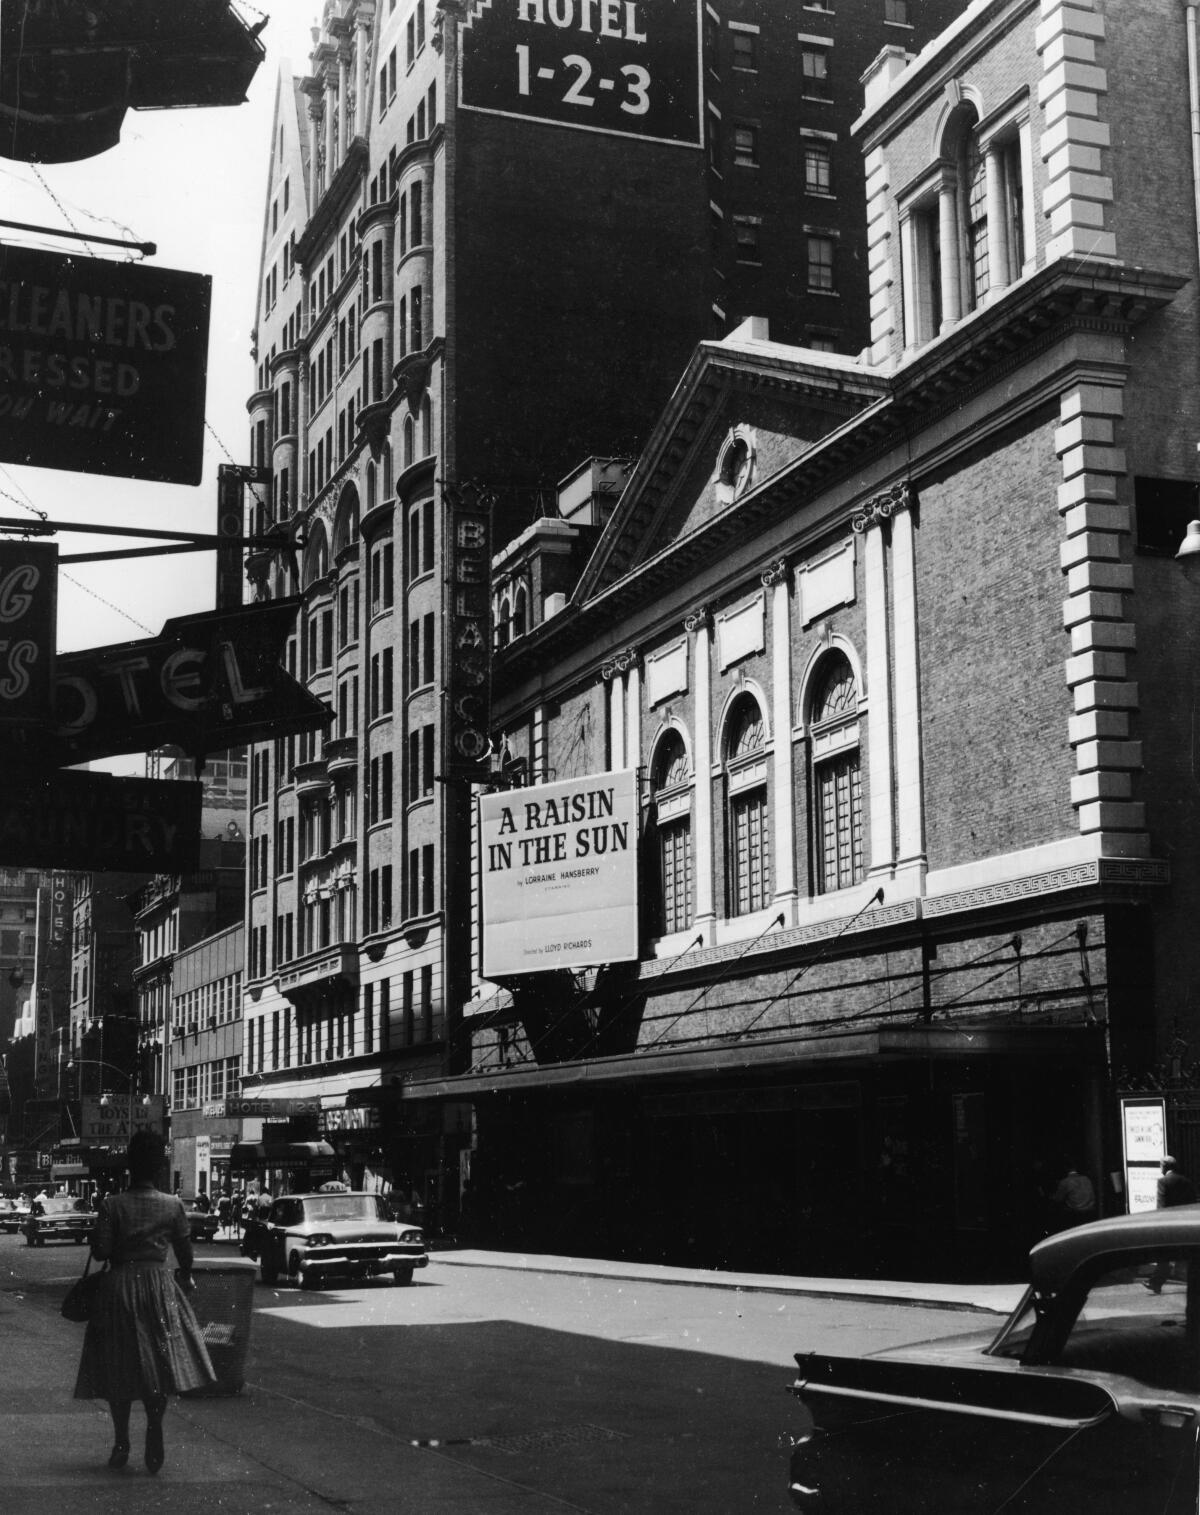 The marquee of the Belasco Theatre in New York advertises Lorraine Hansberry's play 'A Raisin in the Sun.'